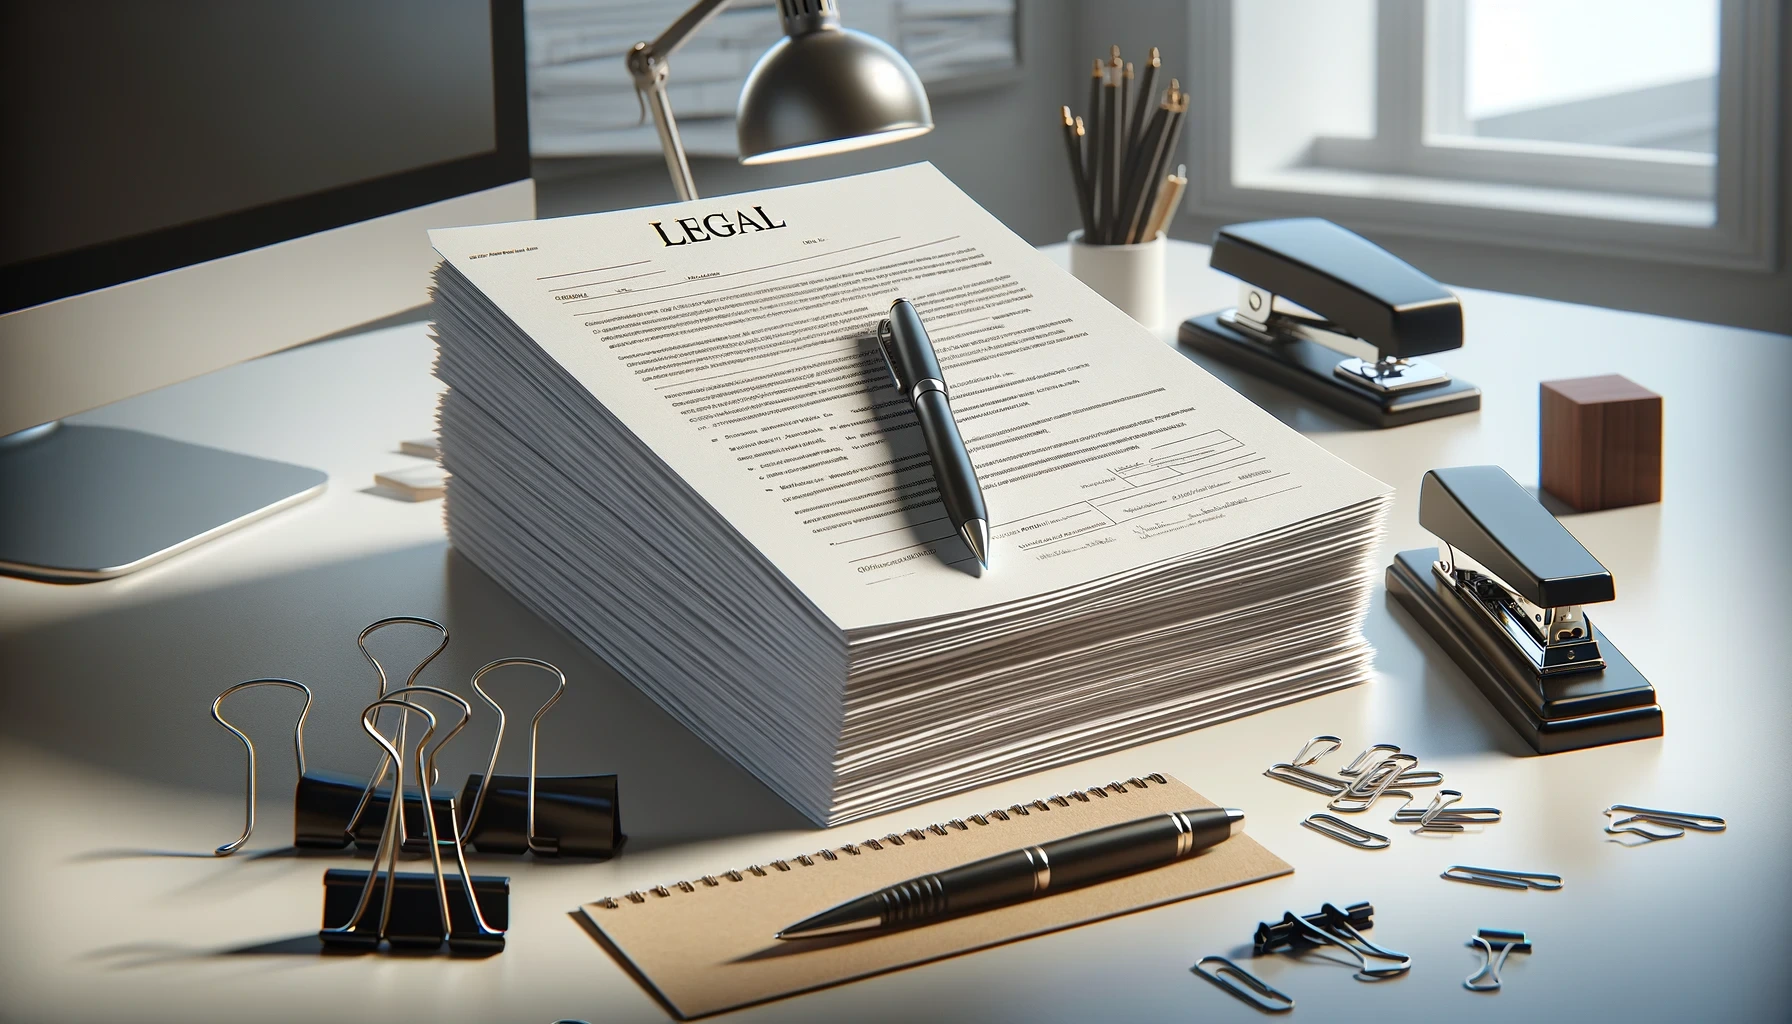 Stack of legal forms with pen, office supplies, and minimalist workspace depicting a professional office setting.